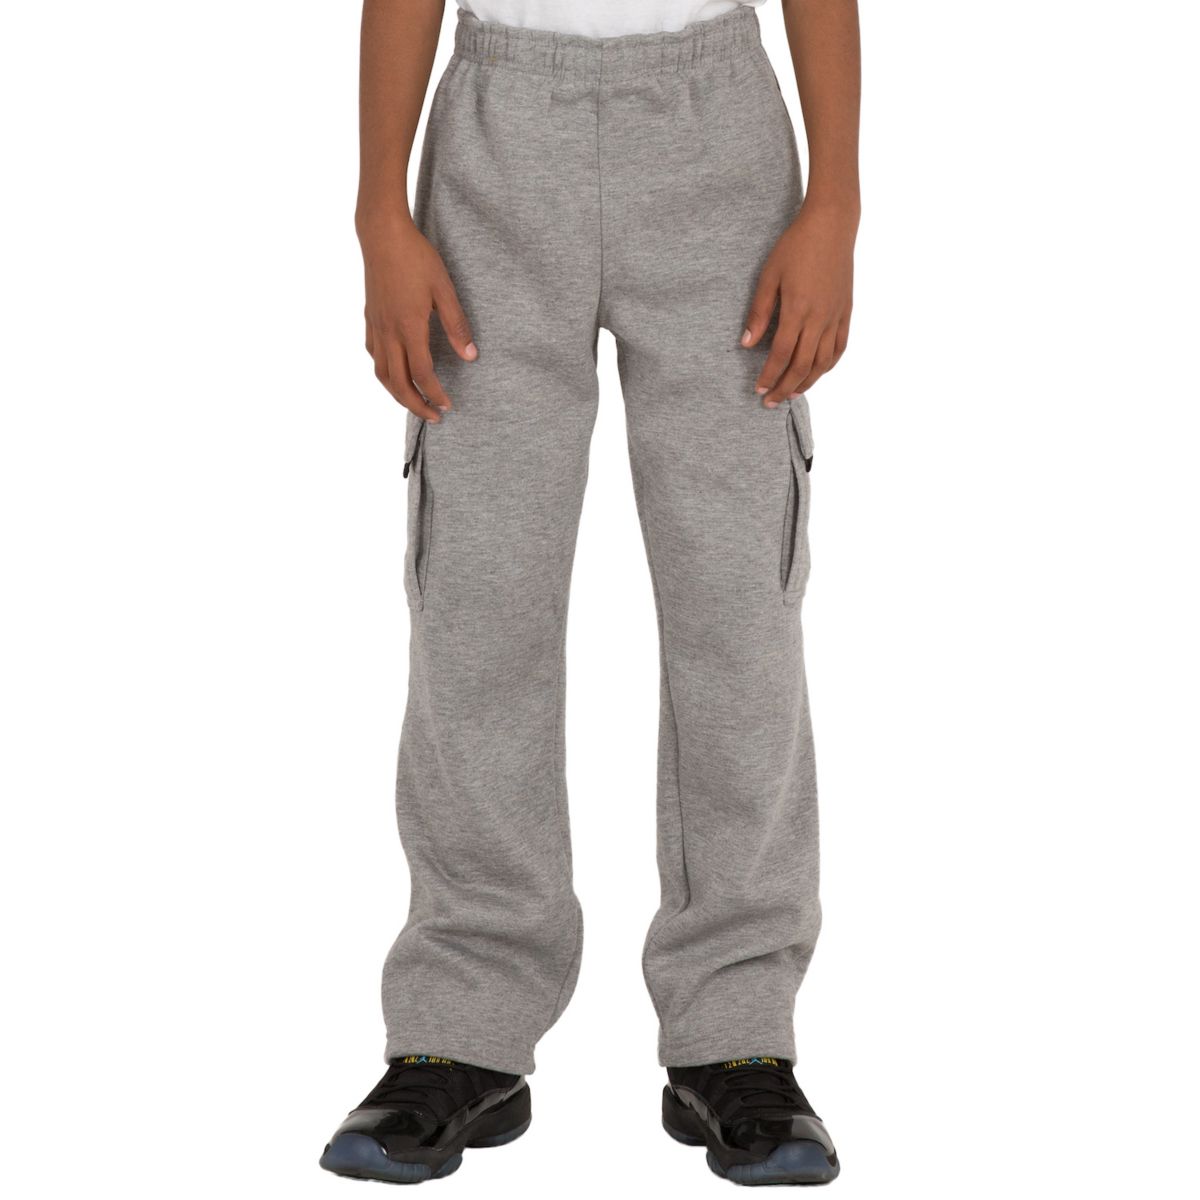 Vibes Boy's Relaxed Fit Fleece Cargo Sweatpants Open-bottom Vibes